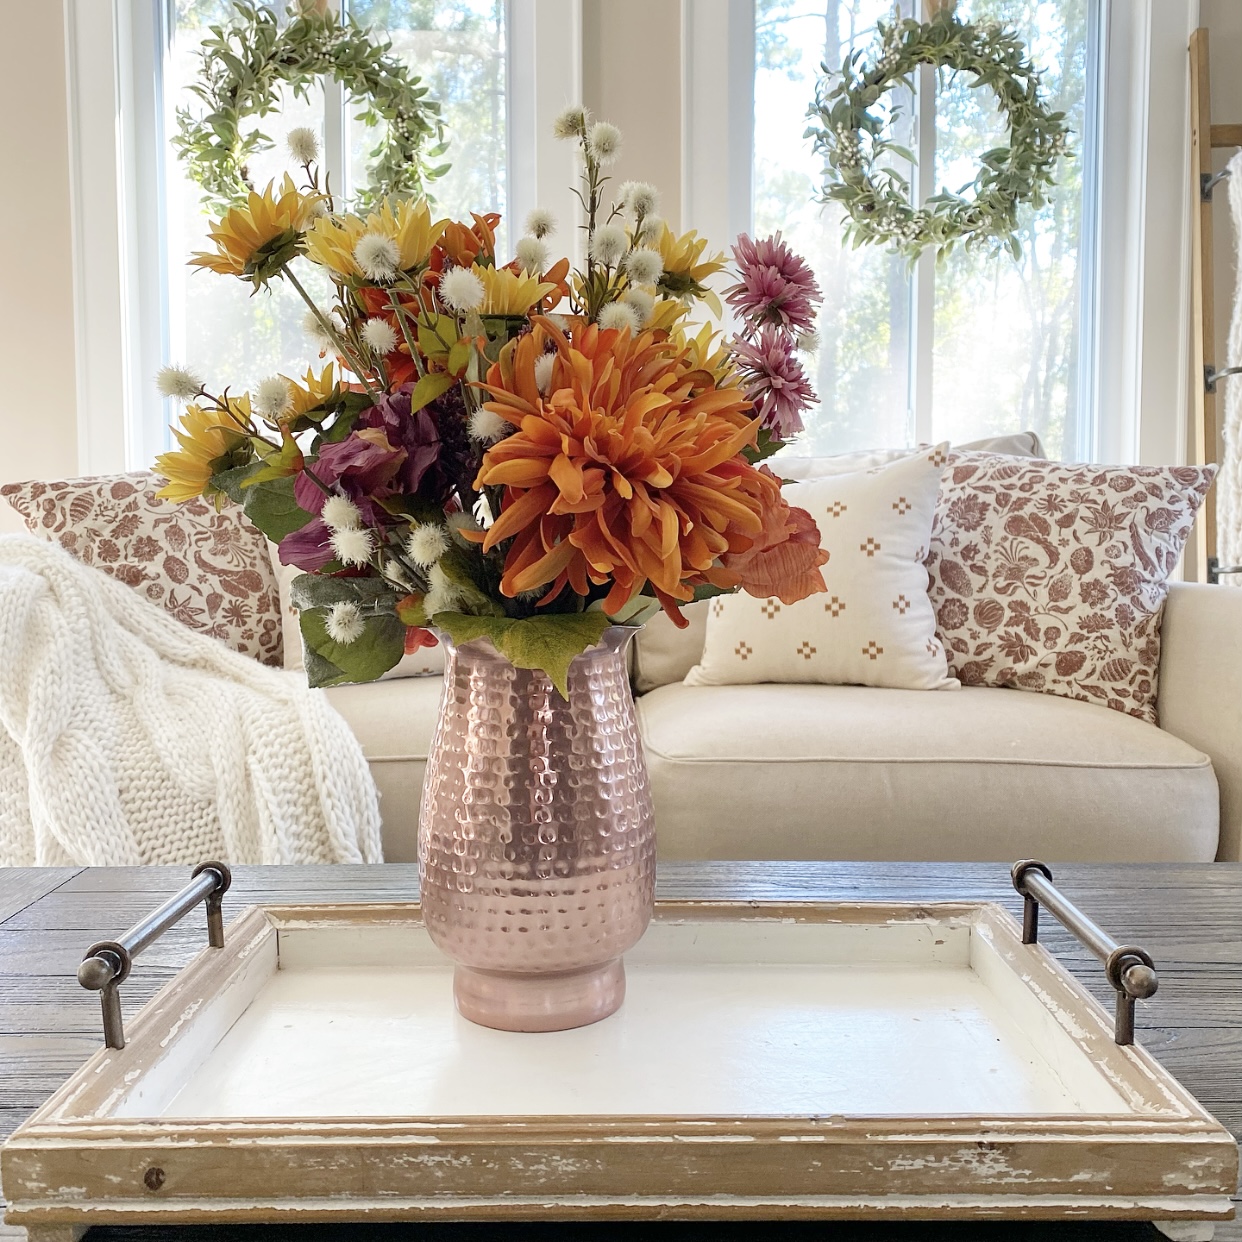 Copper pitcher filled with Fall florals on a tray on a coffee table. In the background is a sofa with Fall pillows on it and a cozy knit blanket. There are wreaths hanging from the windows.